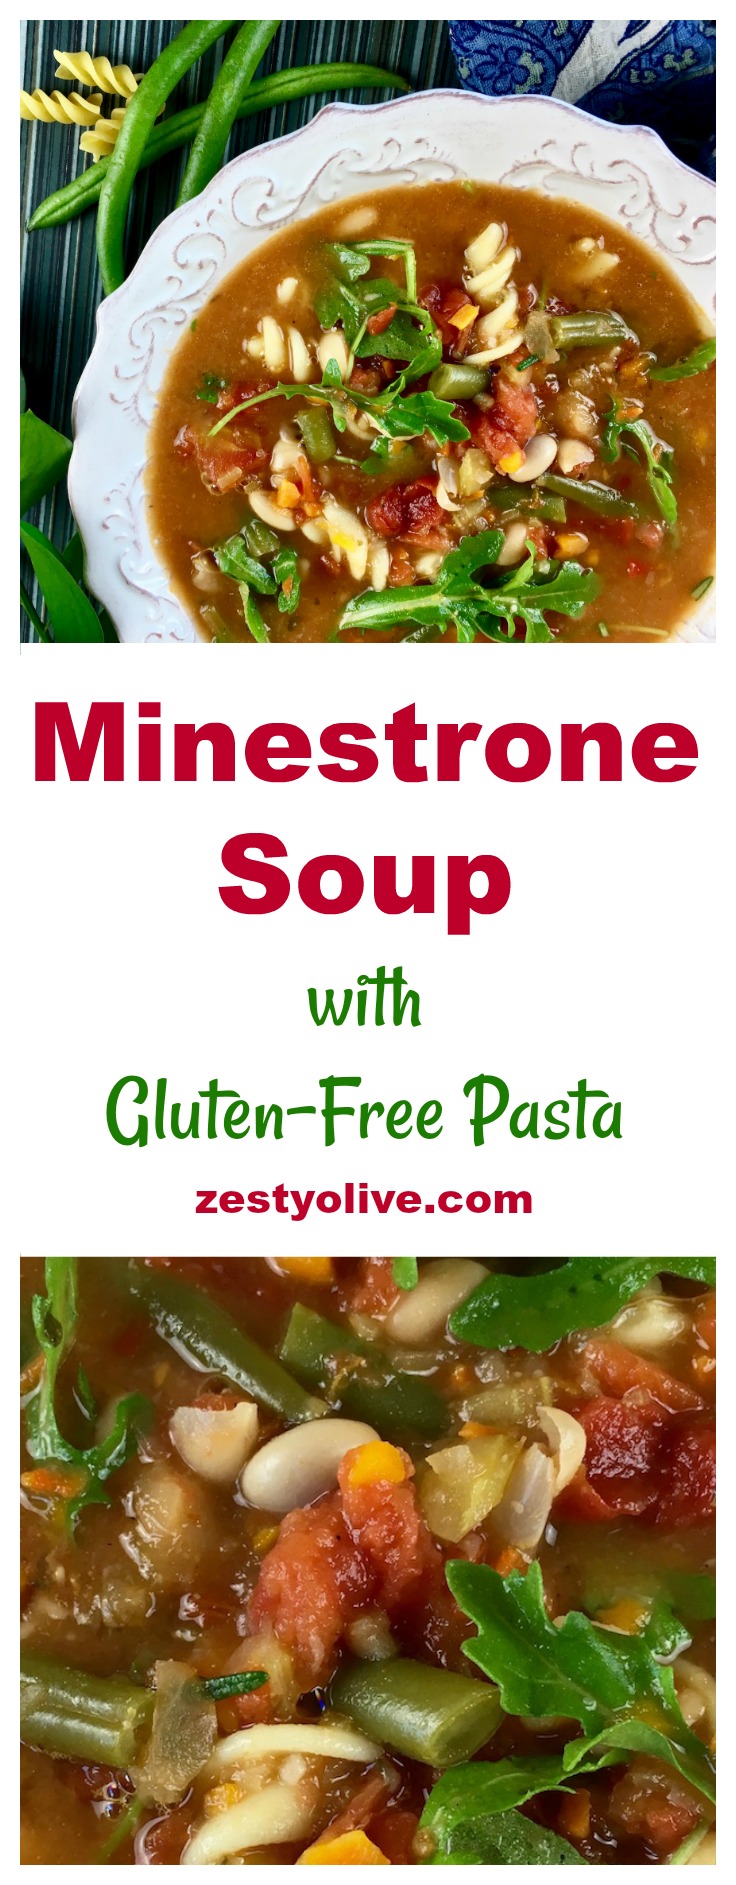 This hearty Italian Minestrone Soup With Gluten Free Pasta is full of healthy veggies and zesty herbs.